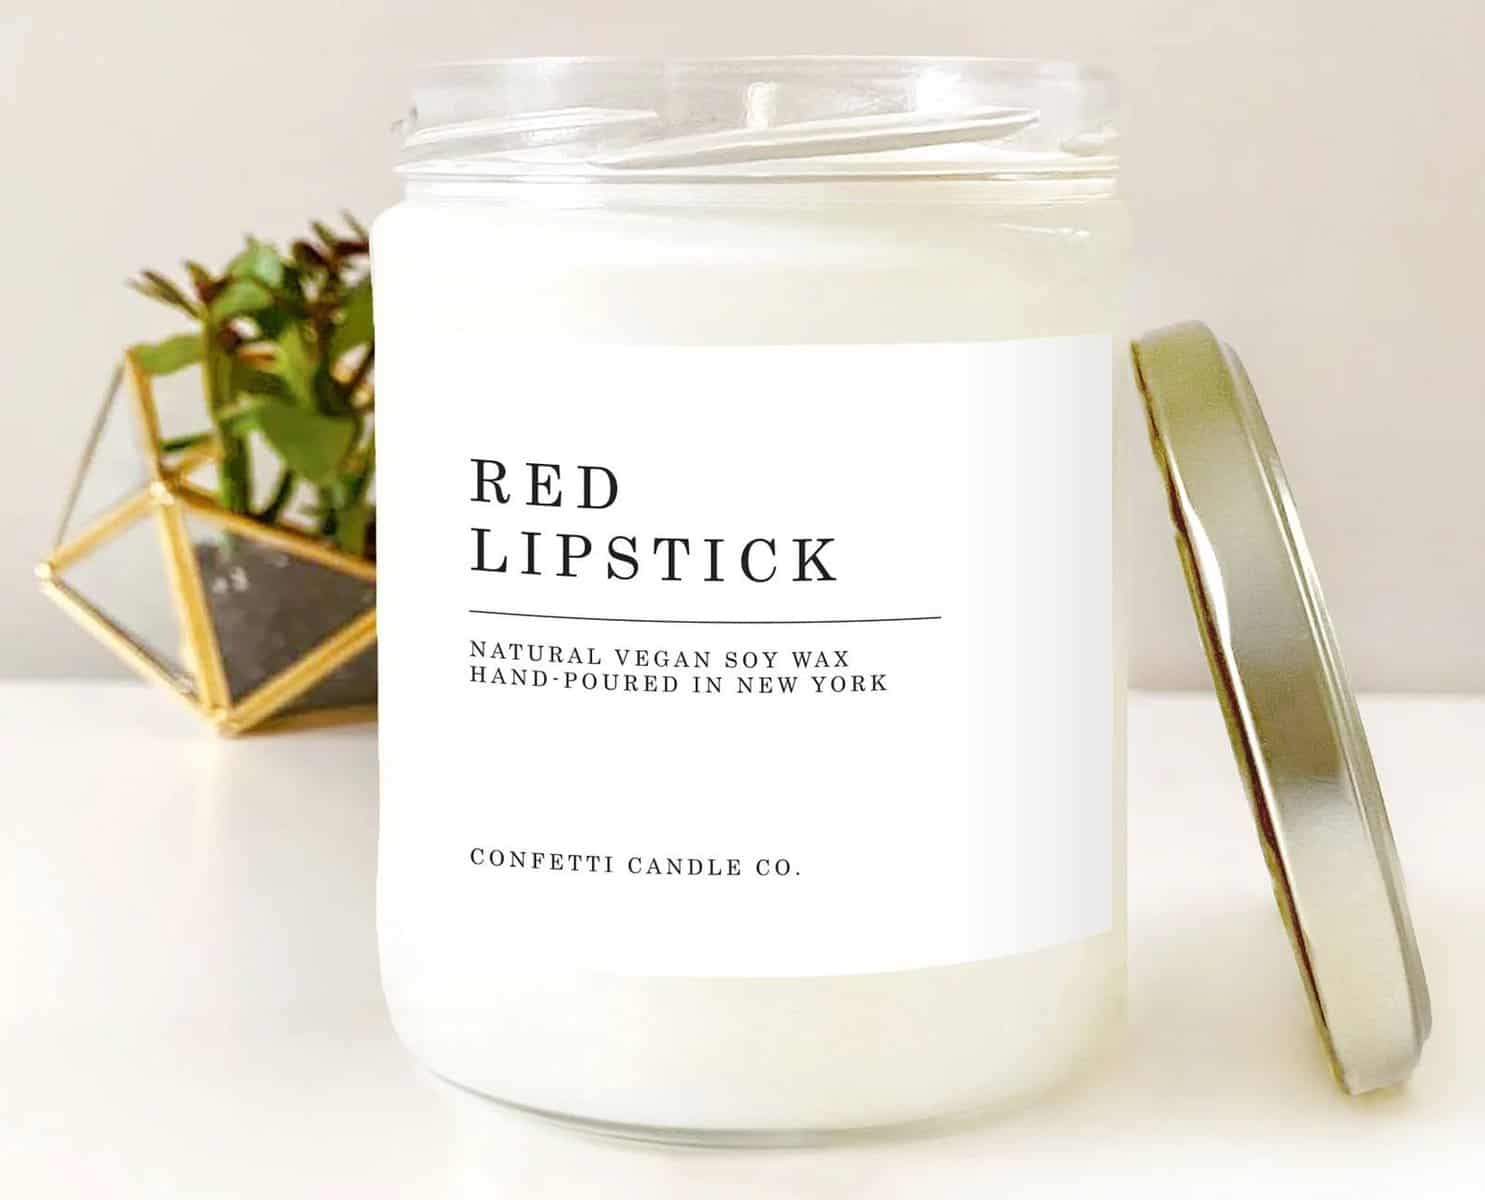 Soy wax candle in "Red Lipstick" scent